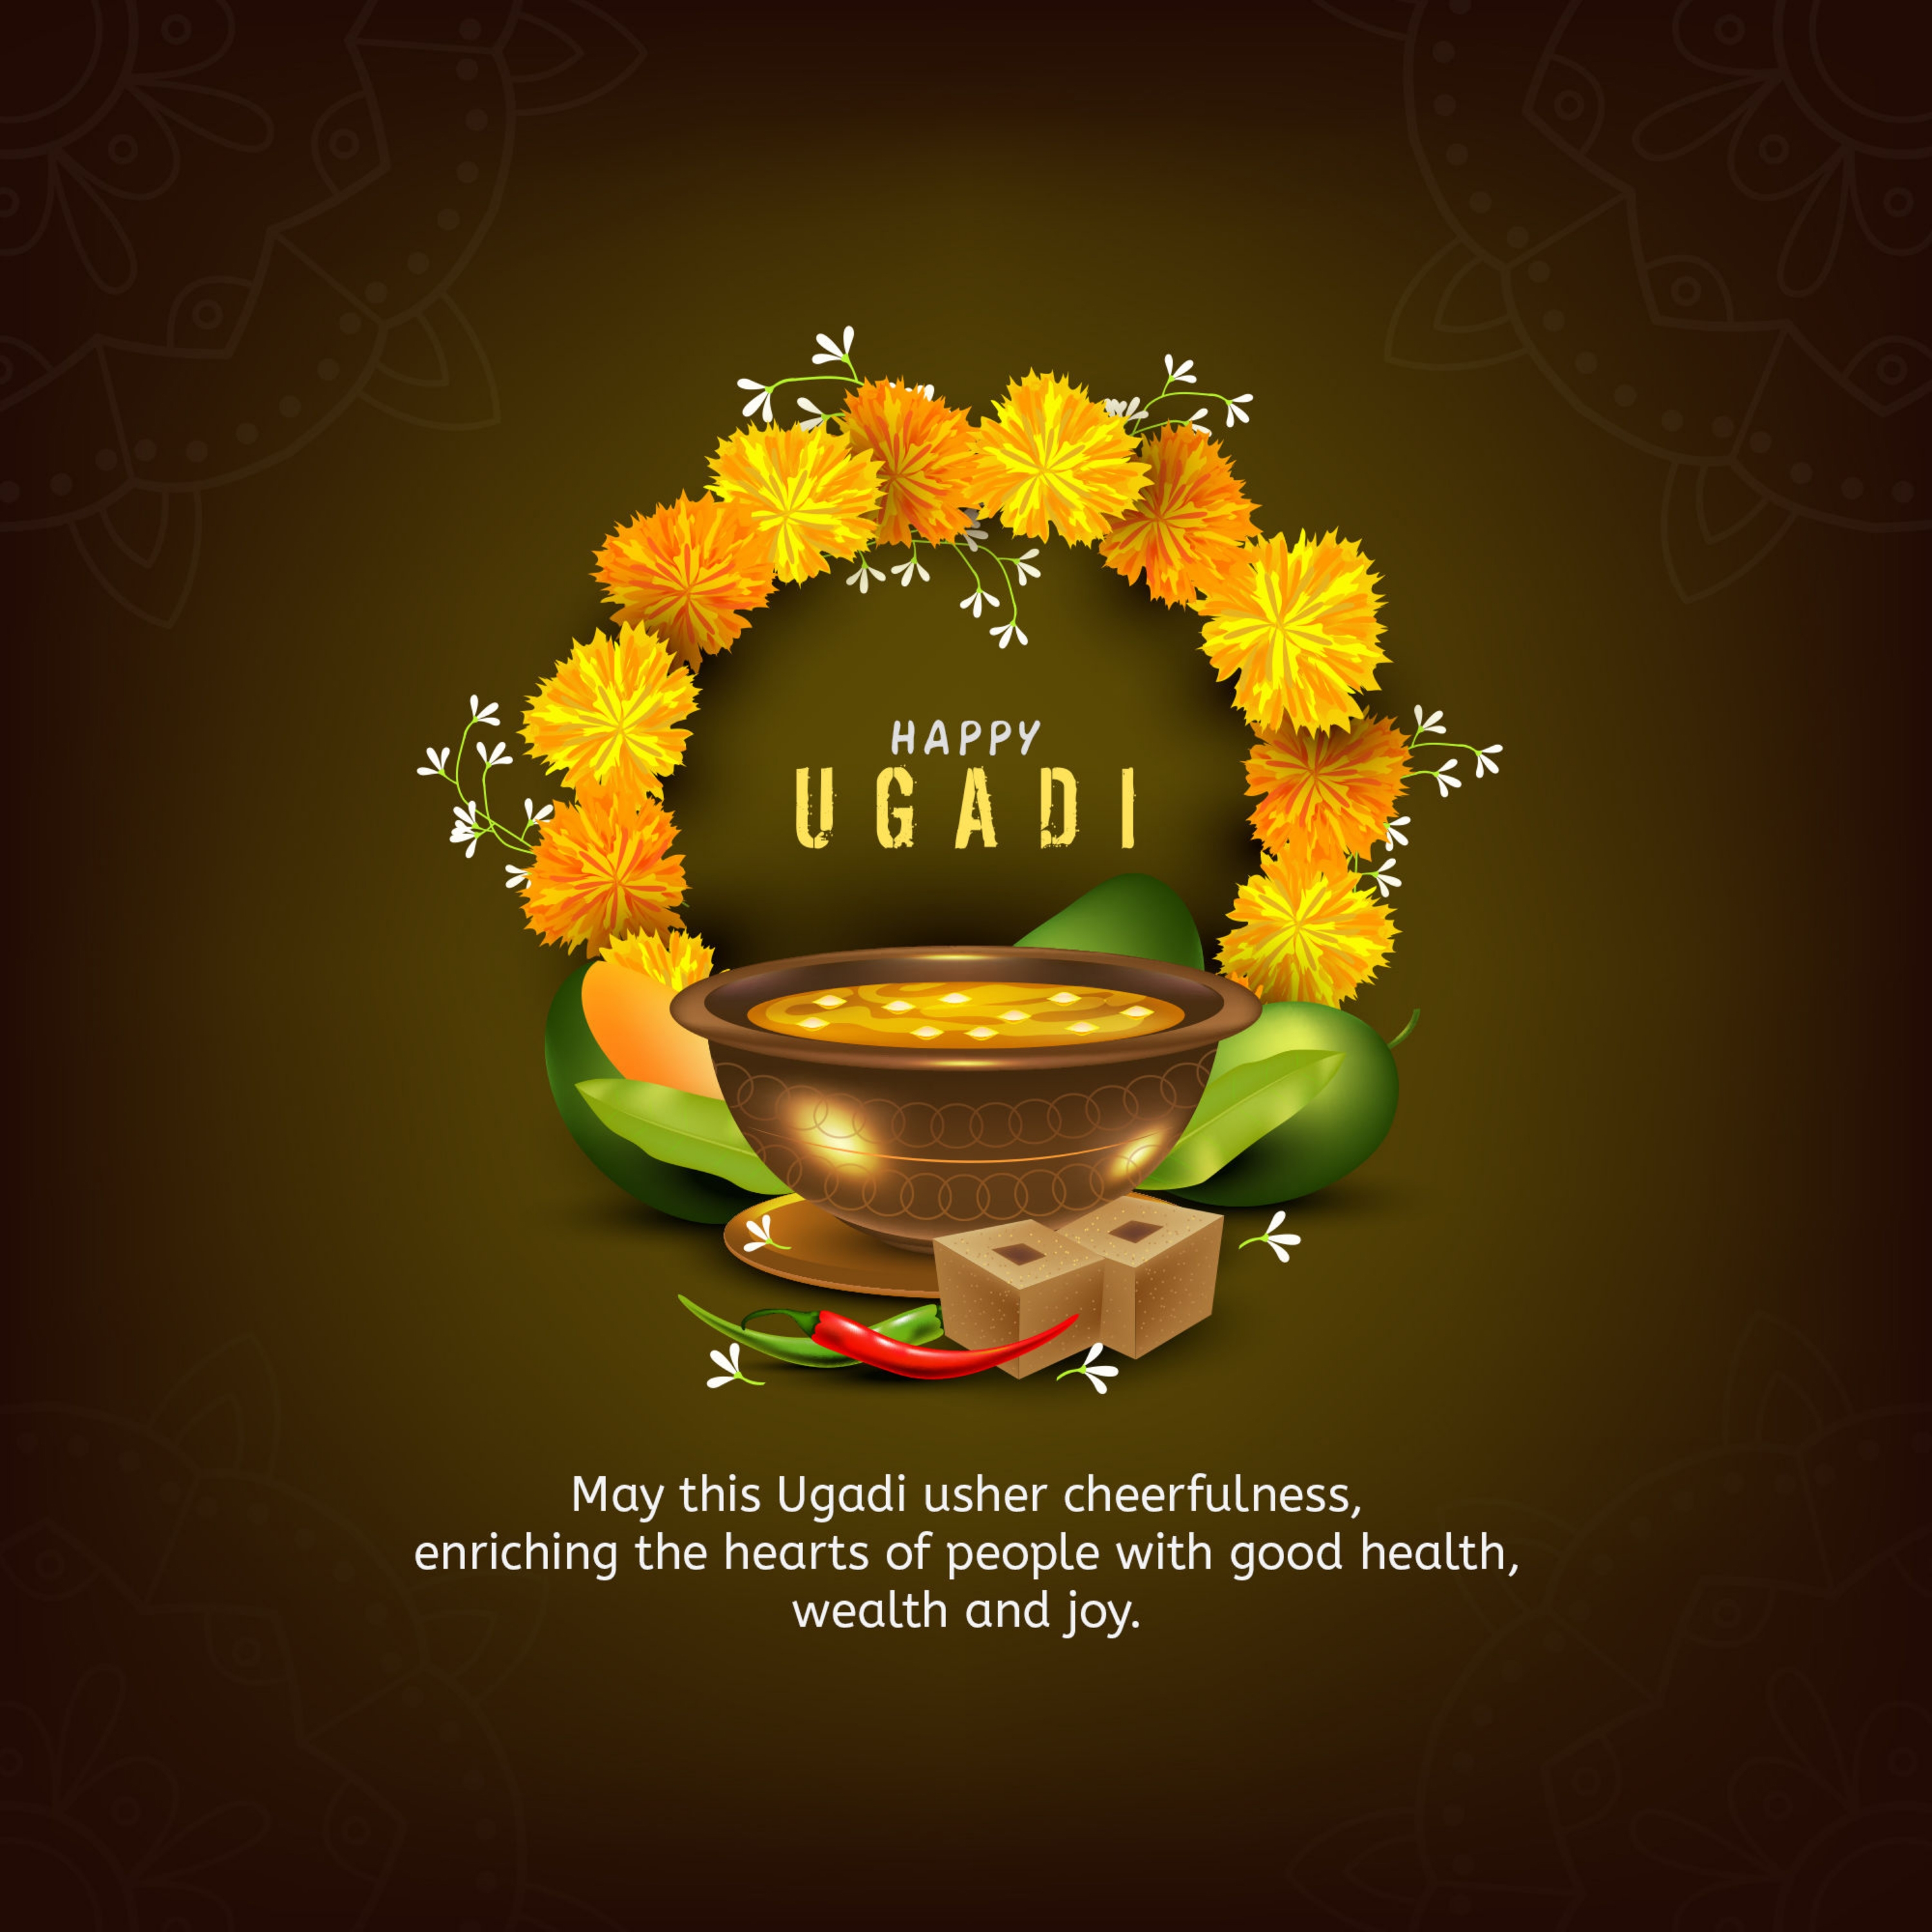 Happy Ugadi 2022 Wishes, Images, Status, Quotes, Messages and WhatsApp